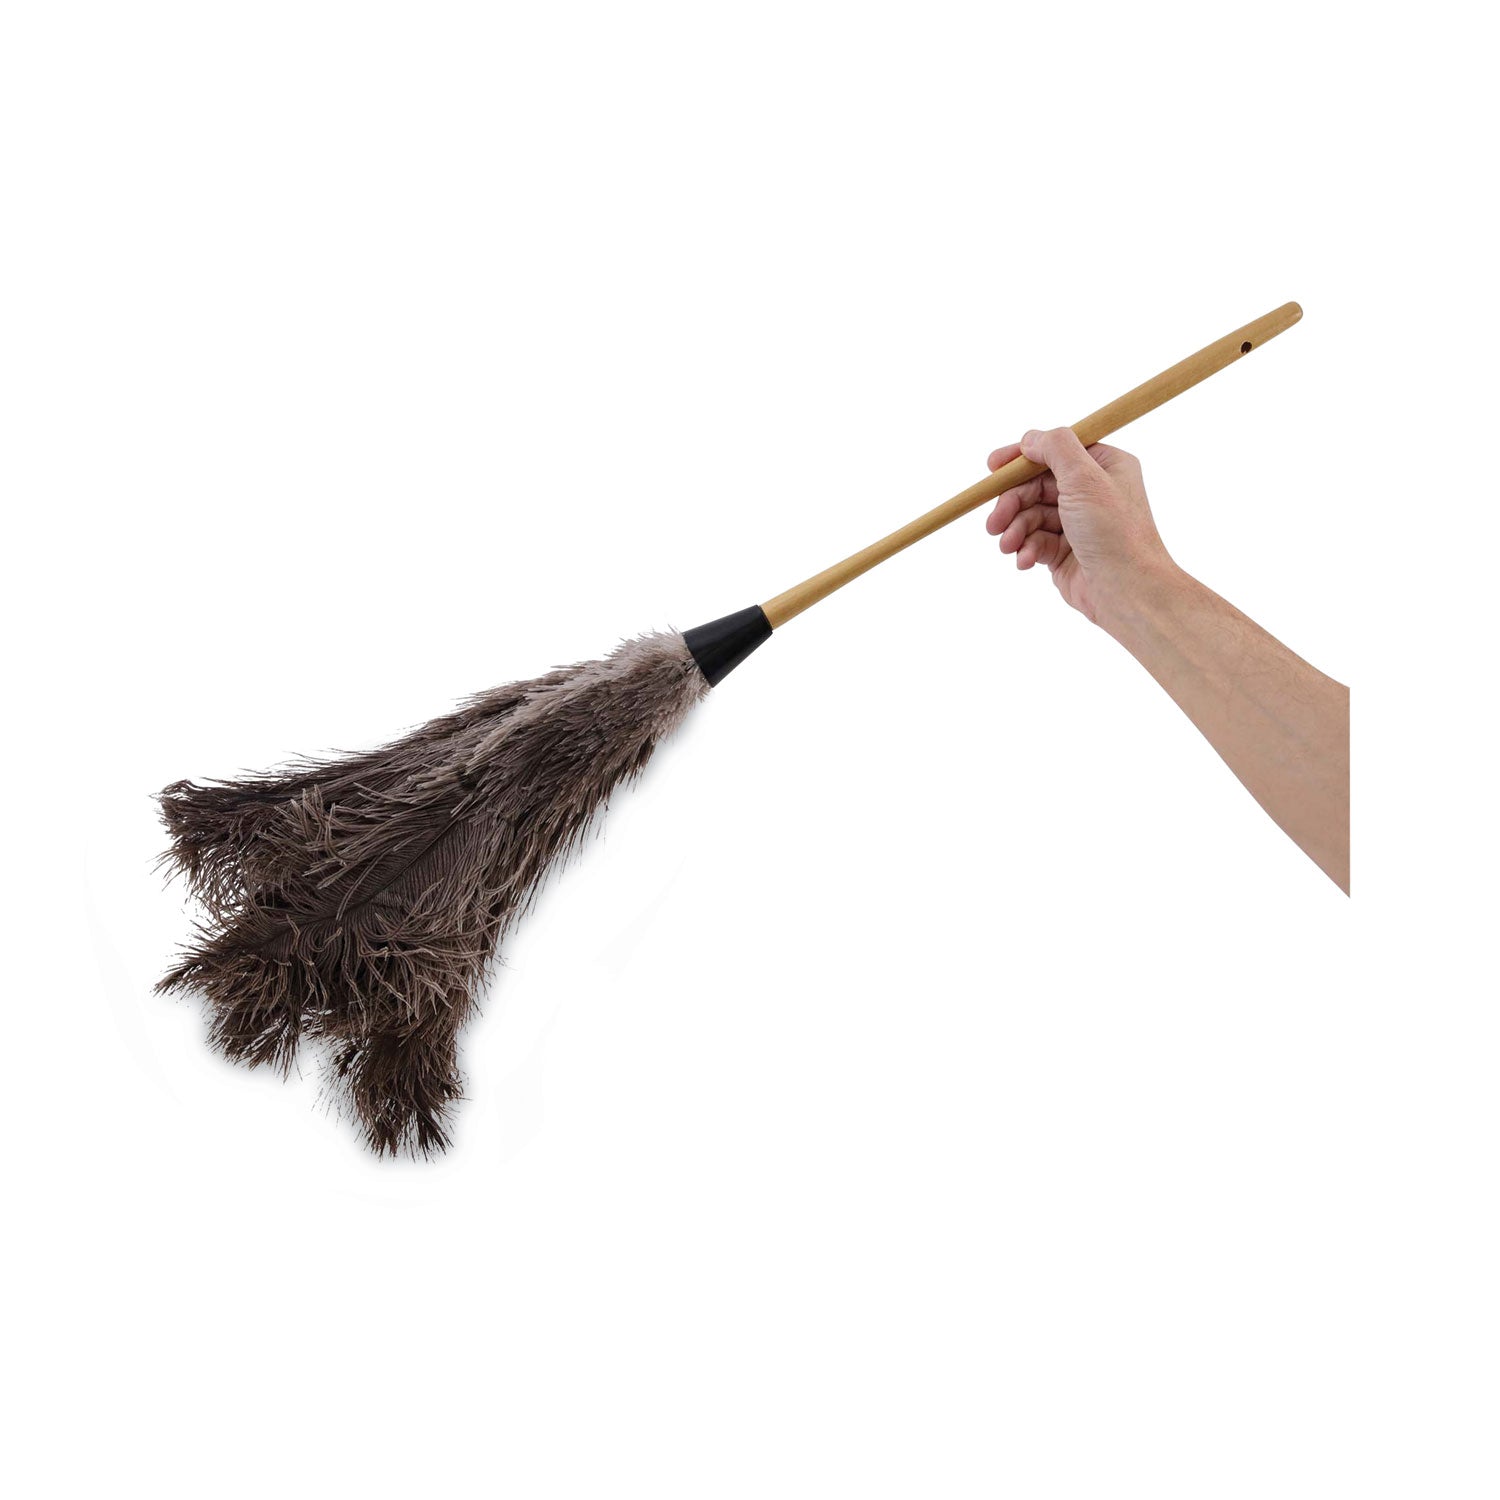 professional-ostrich-feather-duster-16-handle_bwk28gy - 6